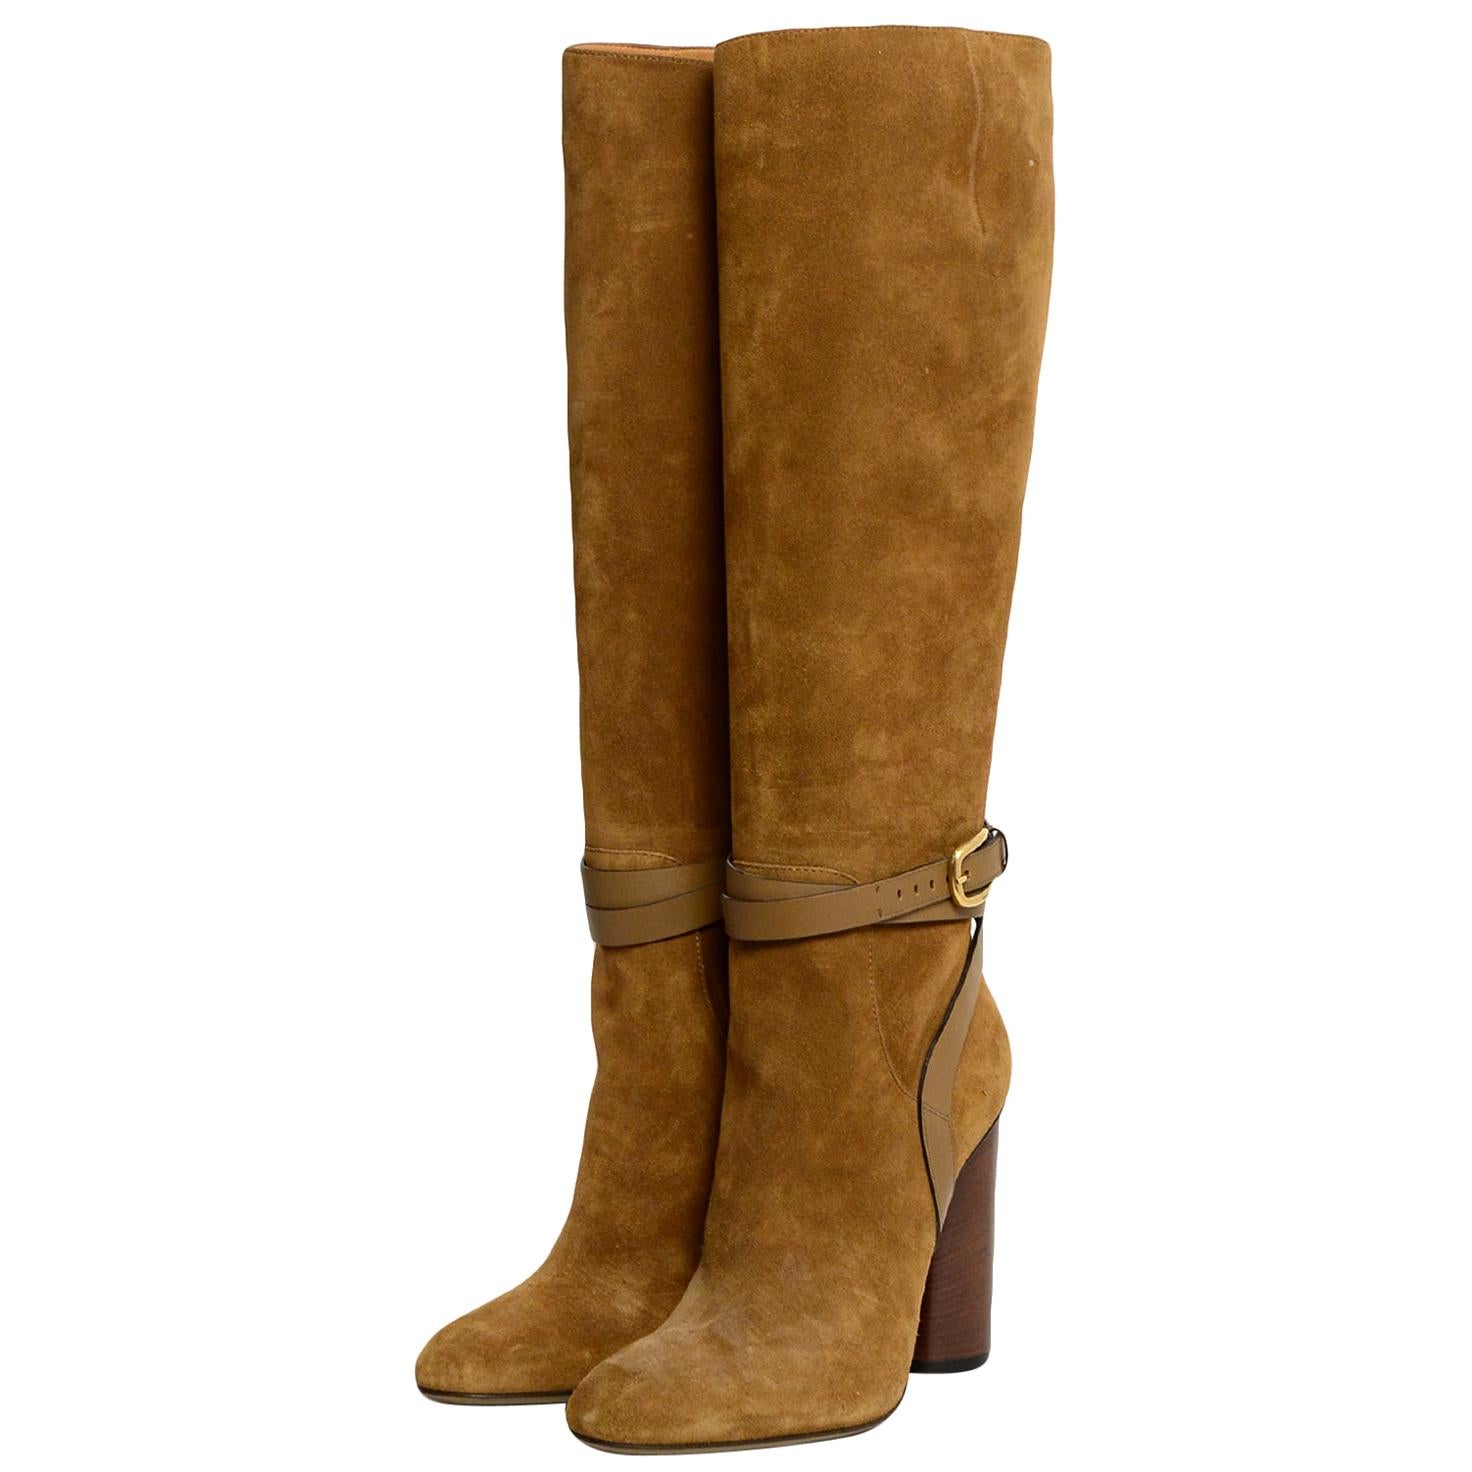 Gucci Tan New Marron Glace Knee-High Boots w/ Ankle Strap sz 39 rt $1, 495